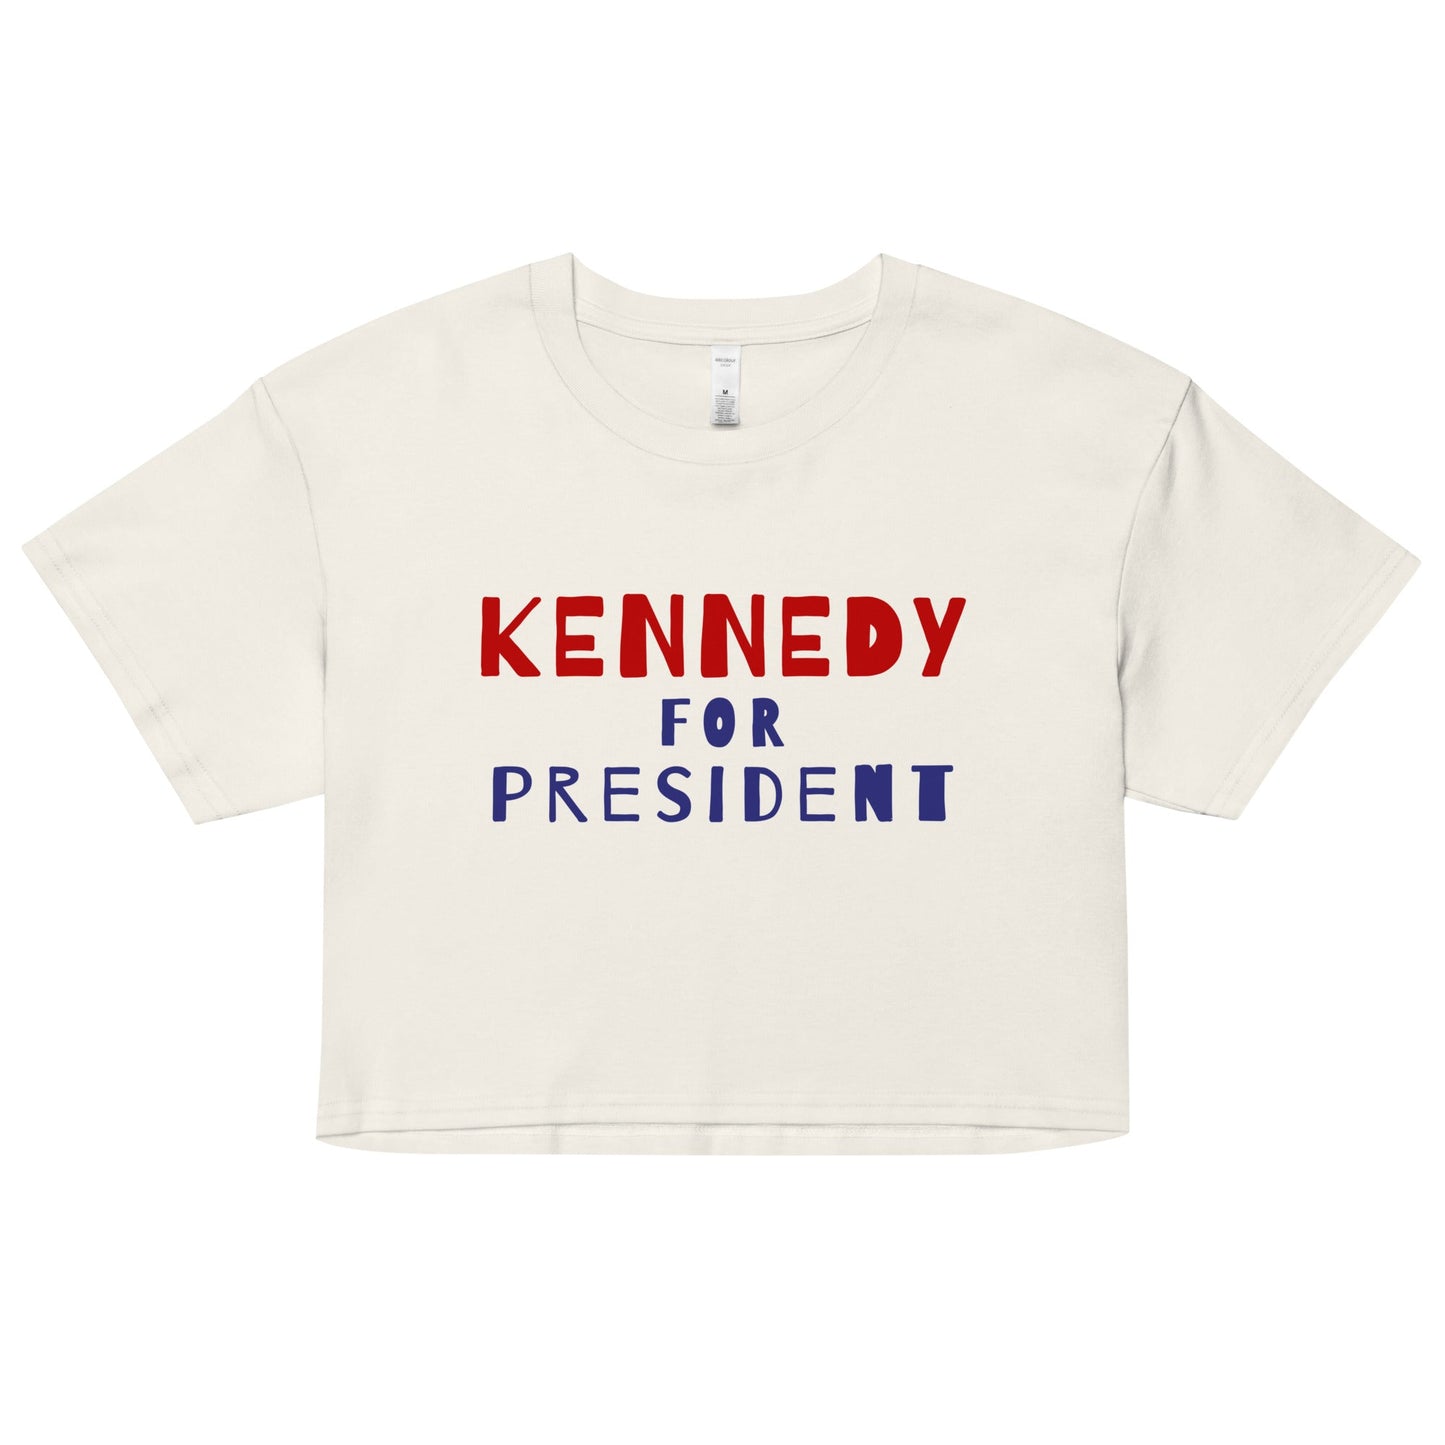 Kennedy for President Women’s Crop Top - TEAM KENNEDY. All rights reserved